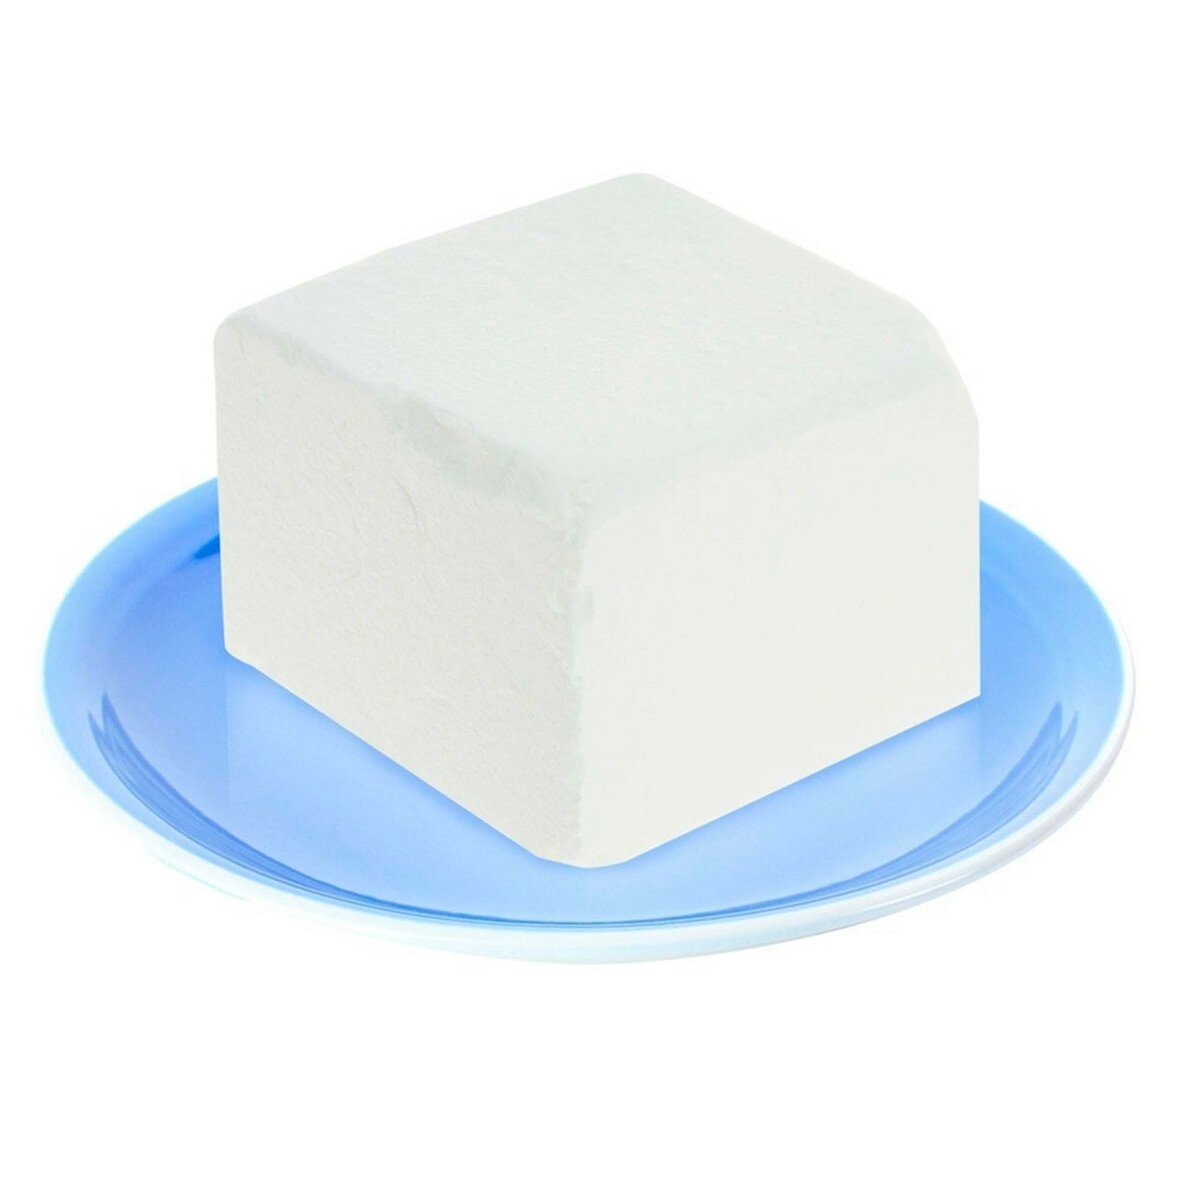 Egyptian Double Cream Cheese 250g Approx. .Weight